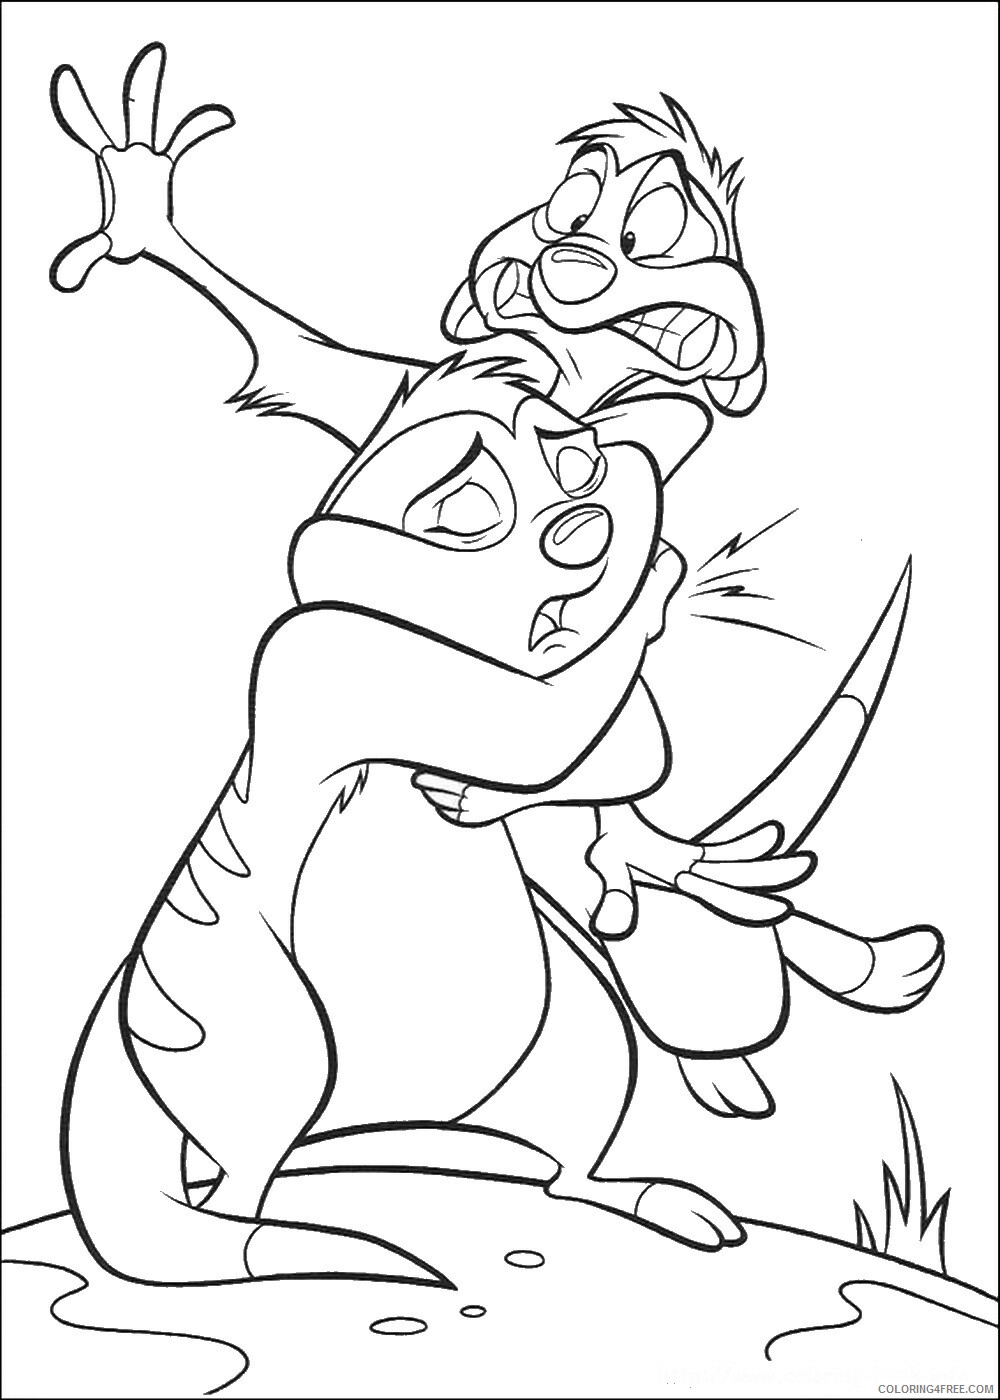 The Lion King Coloring Pages TV Film lionking_37 Printable 2020 09161 Coloring4free